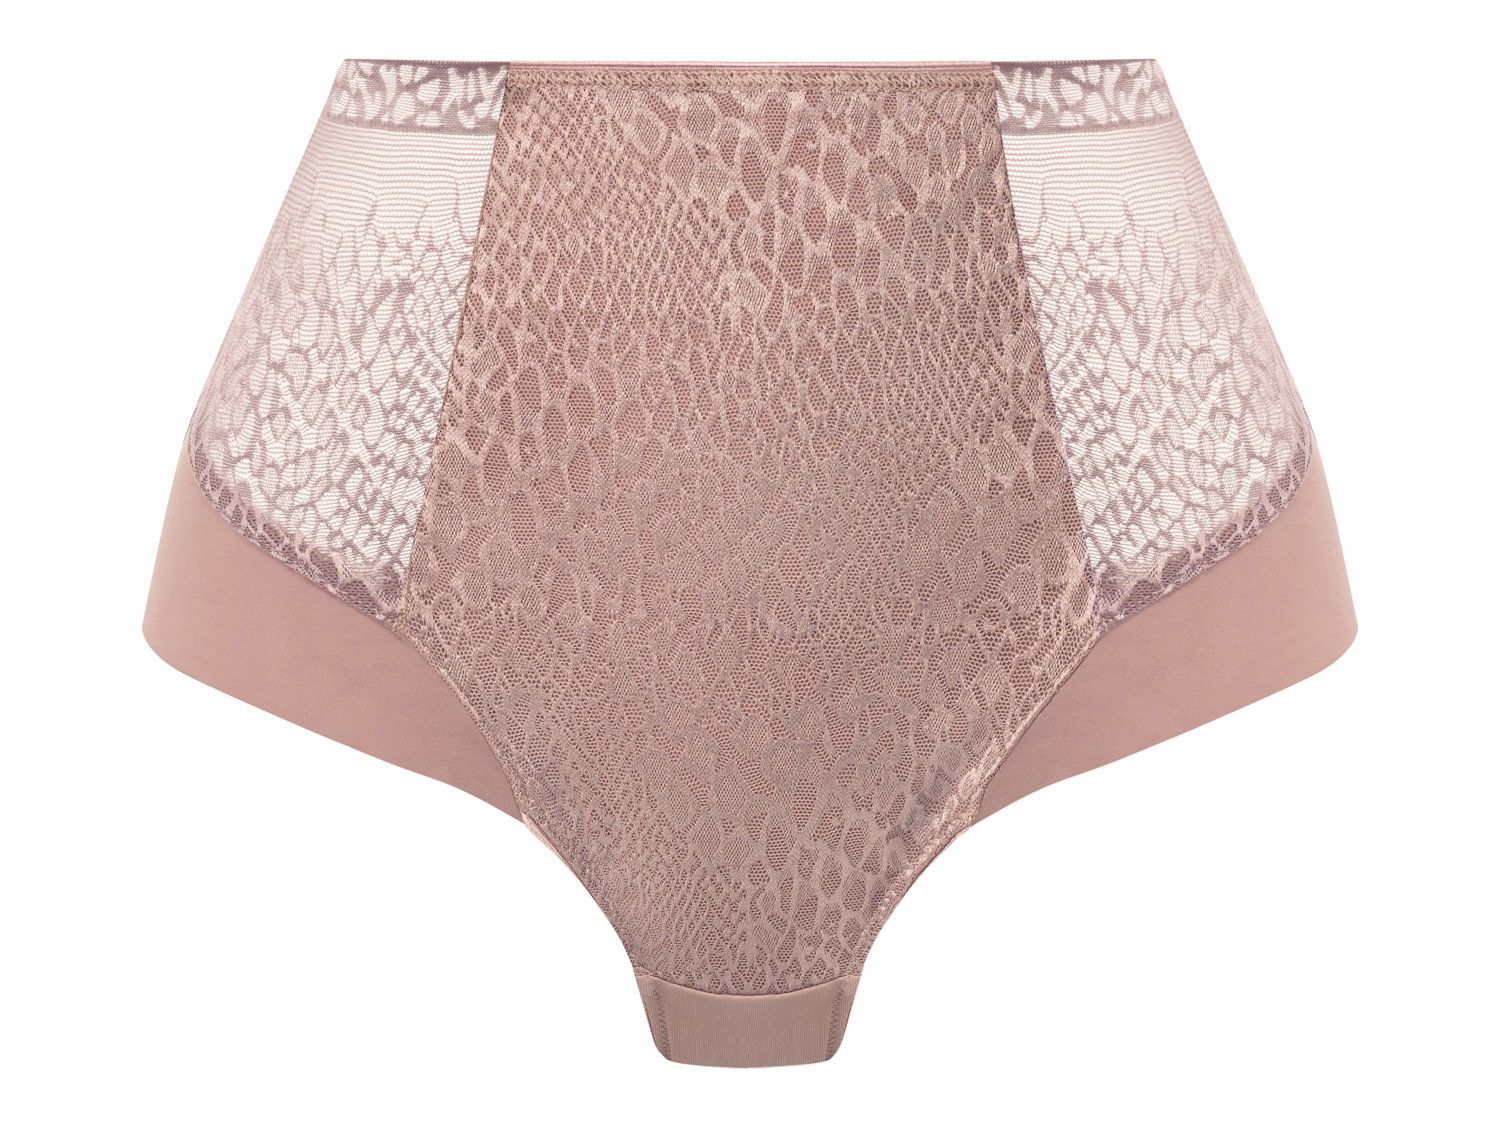 Fantasie Envisage Brief Panty (More colors available) - FL6915 – Blum's  Swimwear & Intimate Apparel